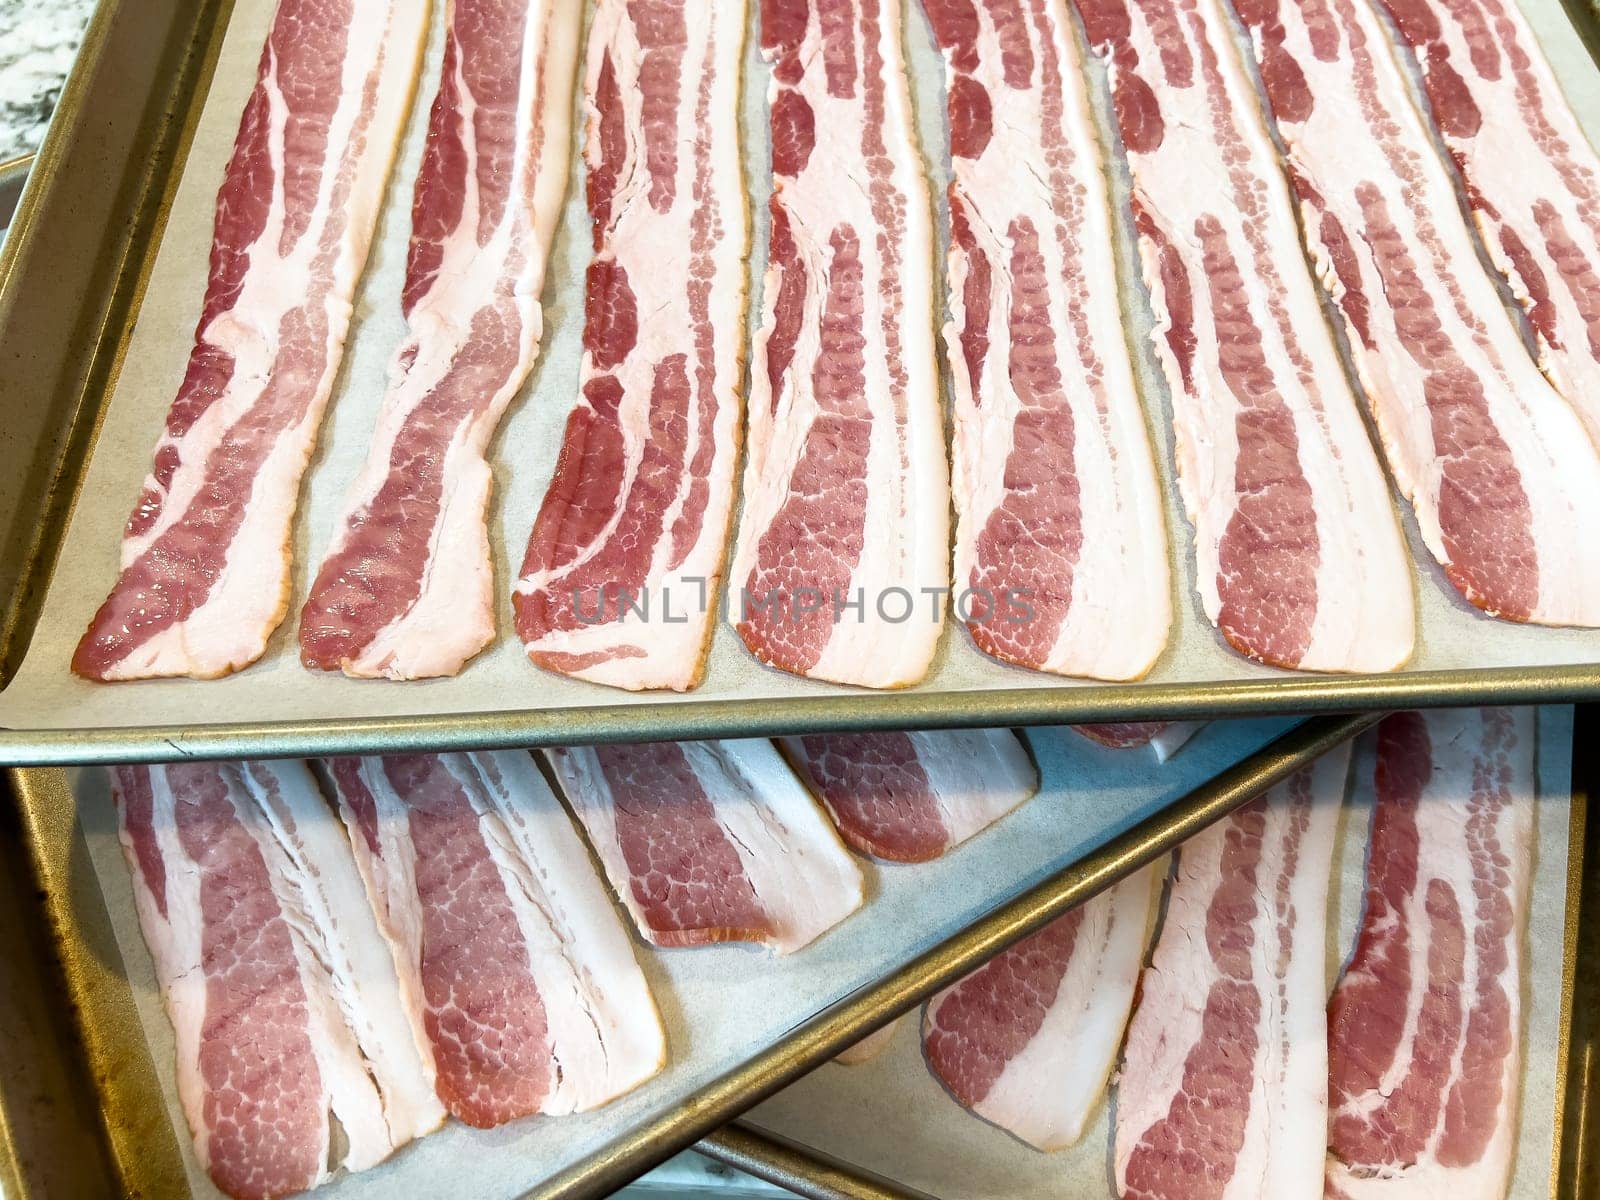 Raw Bacon Strips Ready for Cooking on a Baking Tray by arinahabich